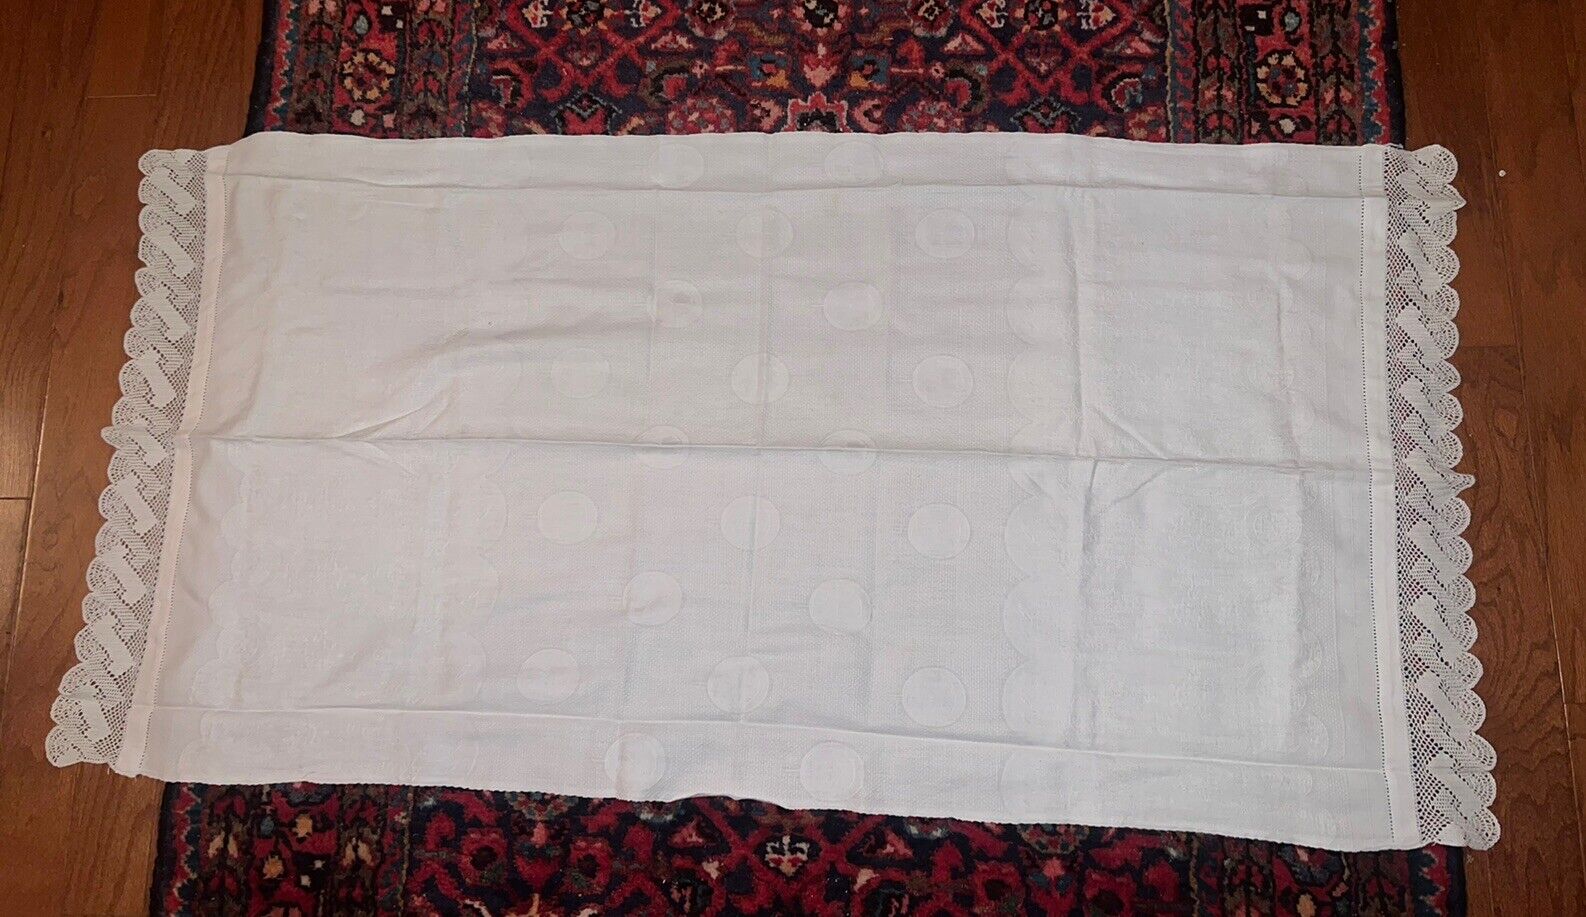 Vintage Crochet Lace White Table Runner Tablecloth Beautiful No Stains Christmas